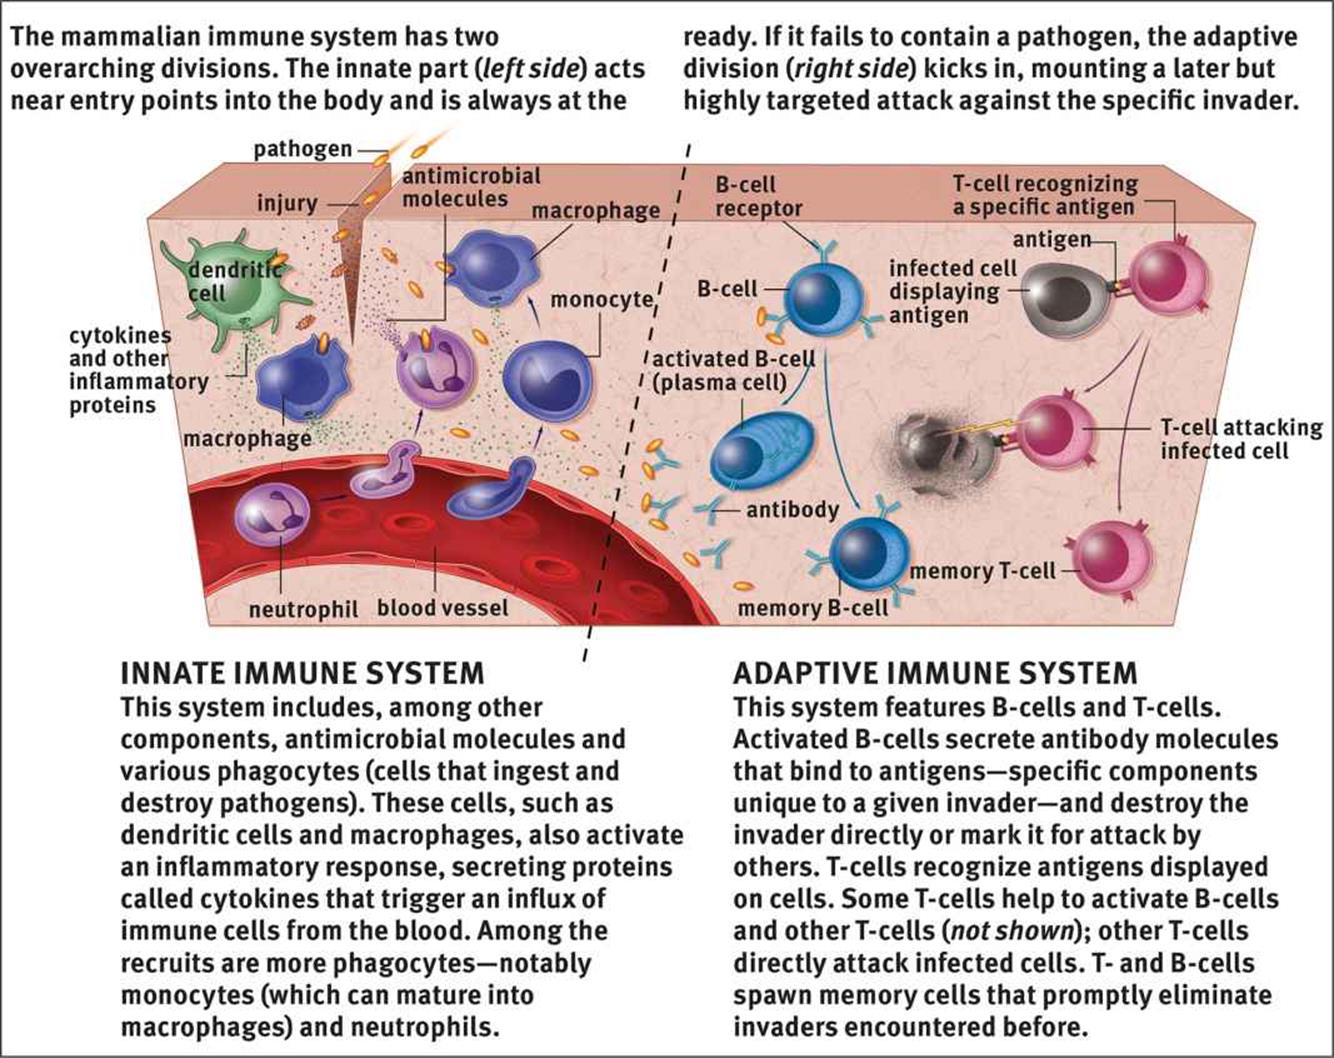 Figure 8.1. Divisions of the Immune System